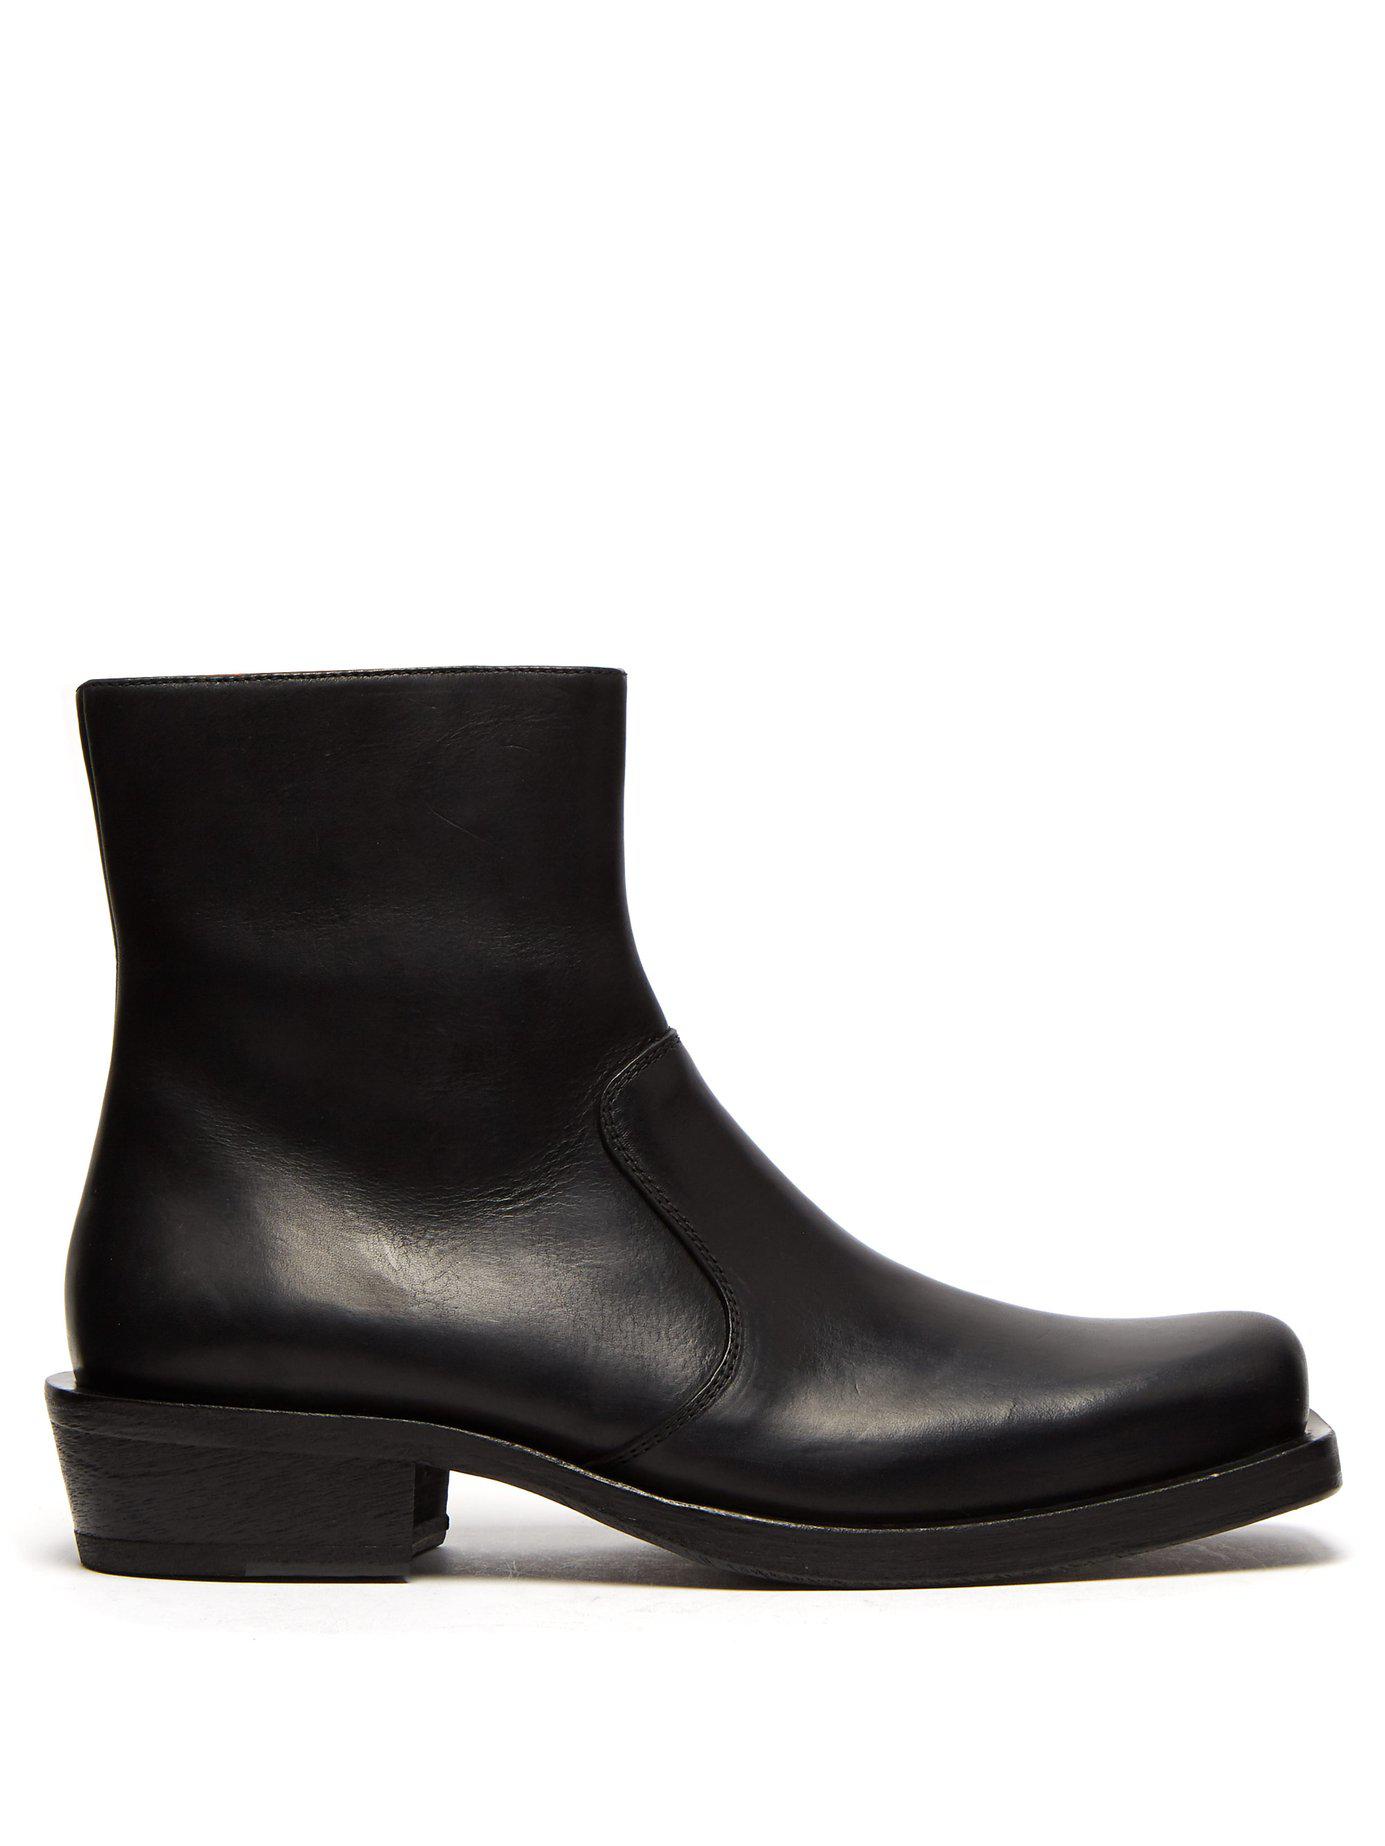 Acne Studios Square-toe Leather Ankle Boots in Black for Men | Lyst Canada